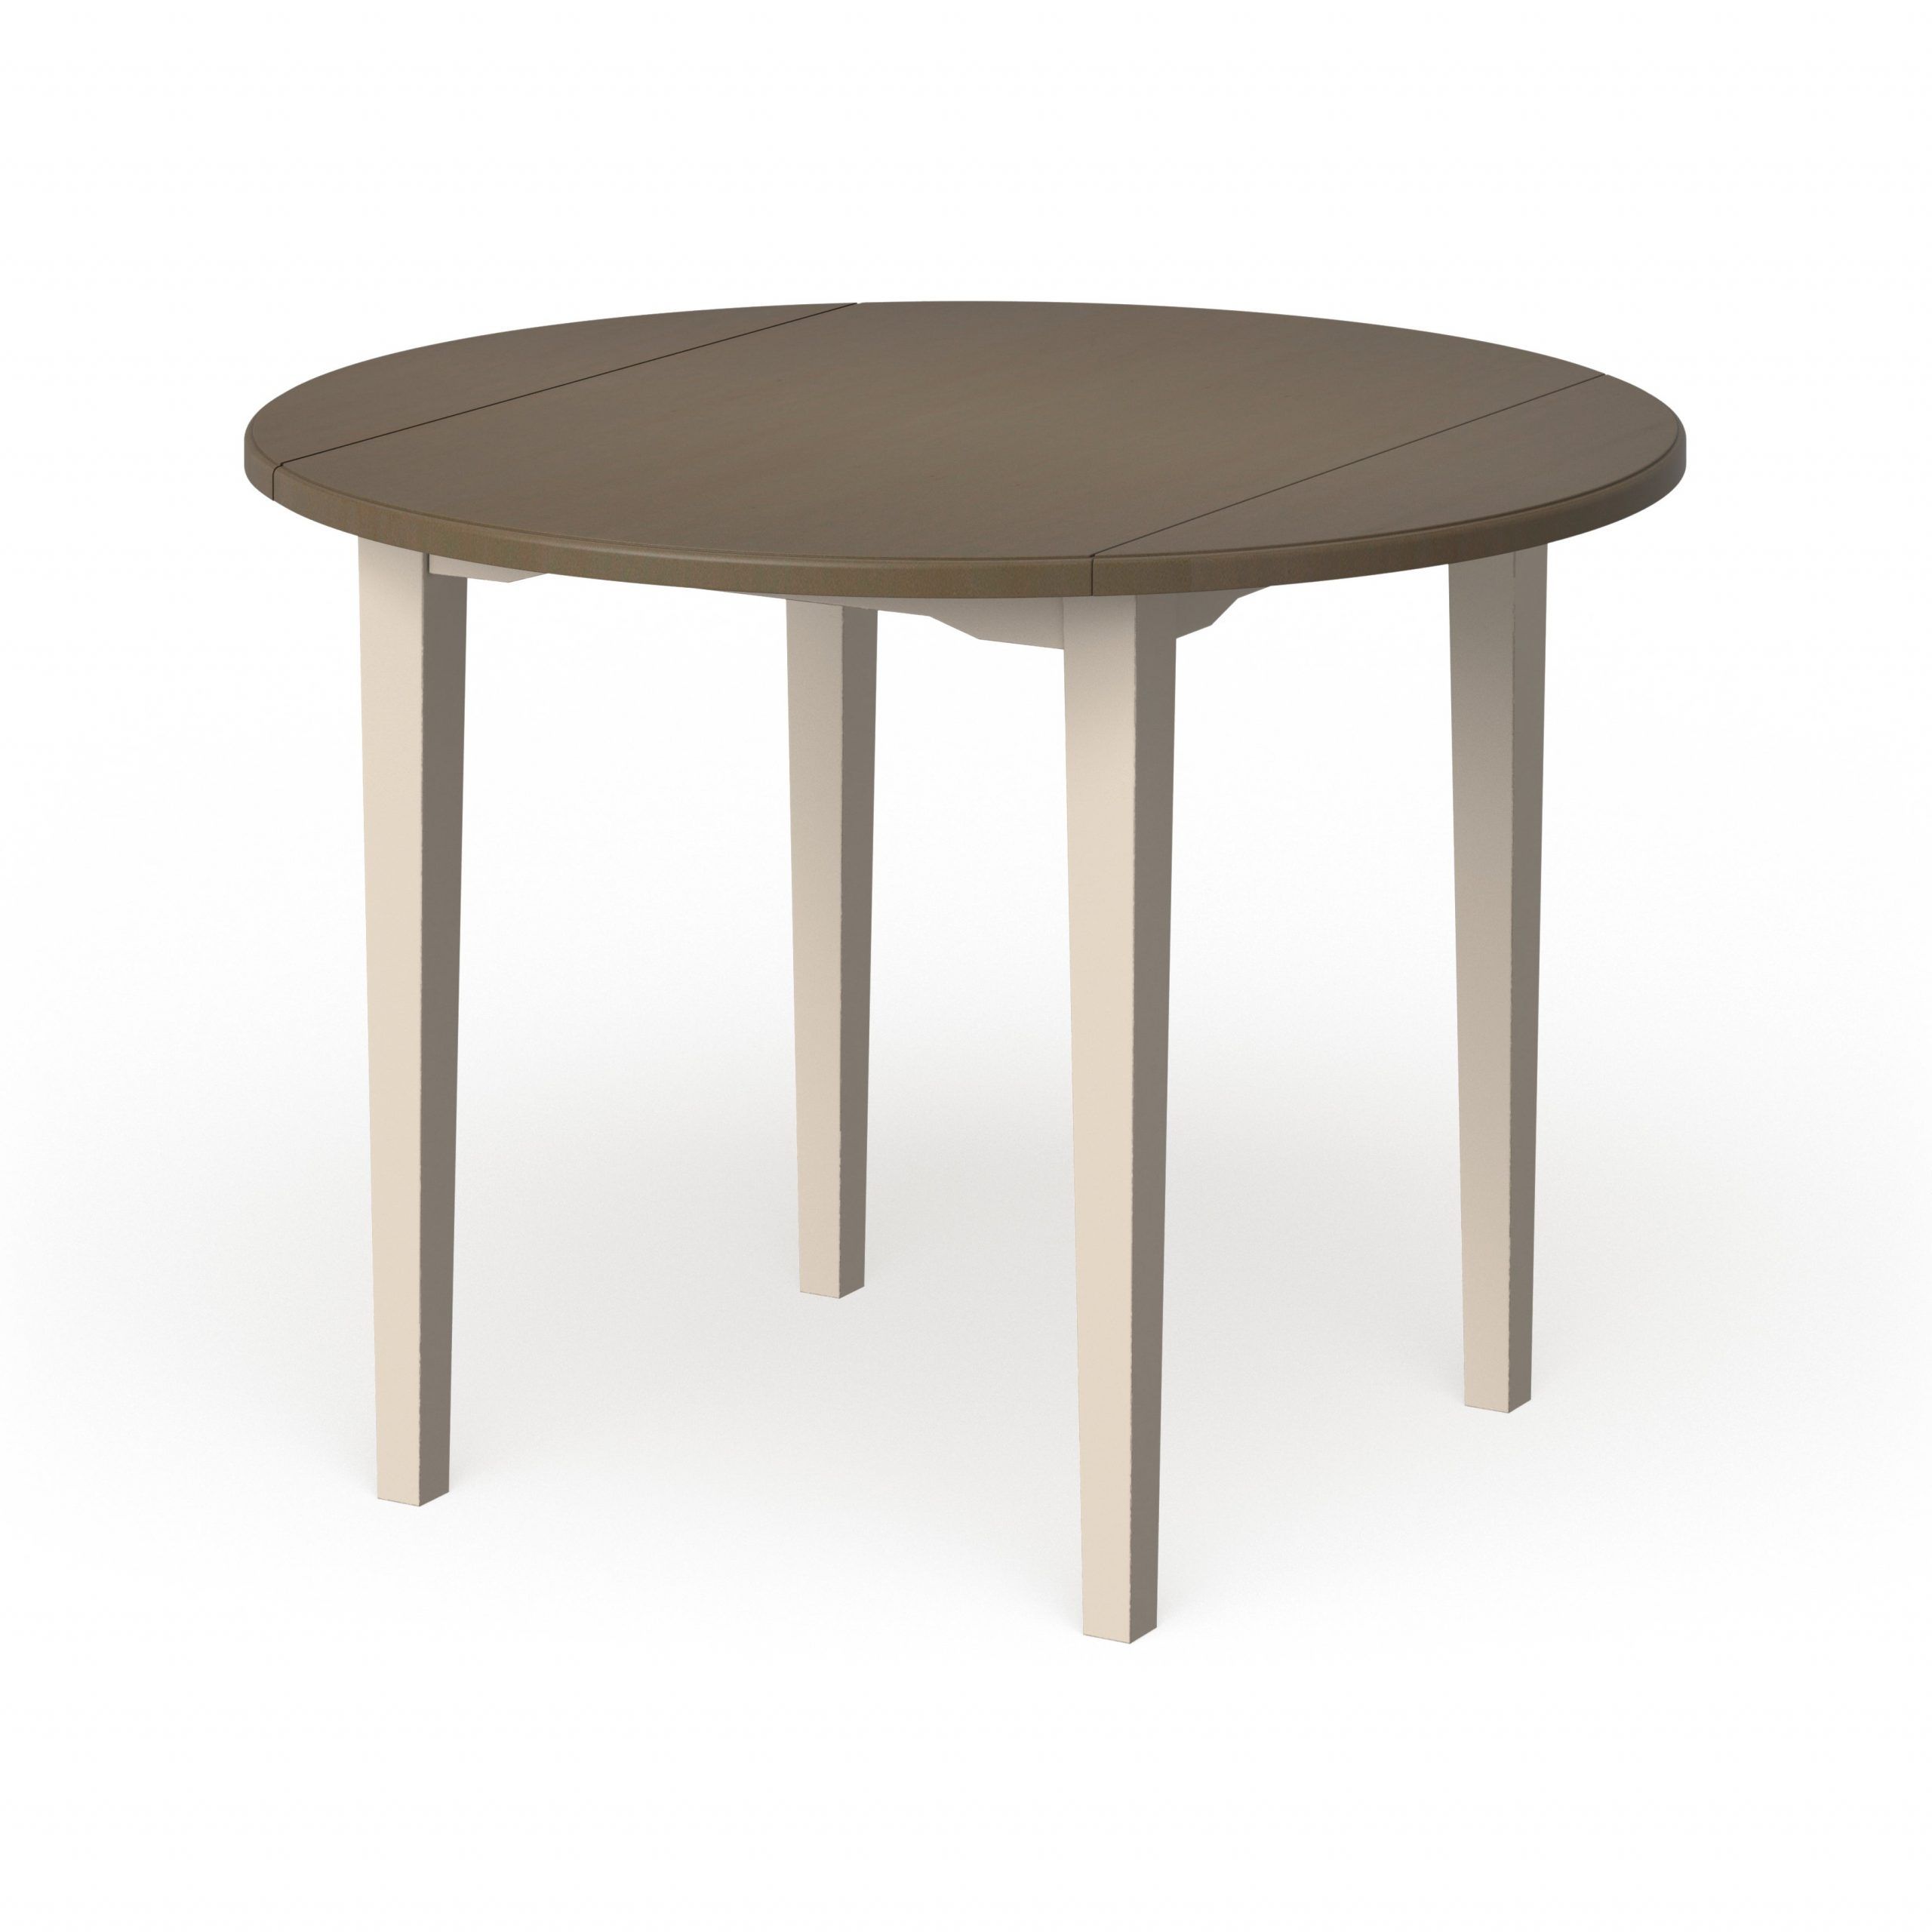 Gray Drop Leaf Tables Inside Current The Gray Barn Steeplechase Sea White – Grey Round Drop (View 15 of 15)